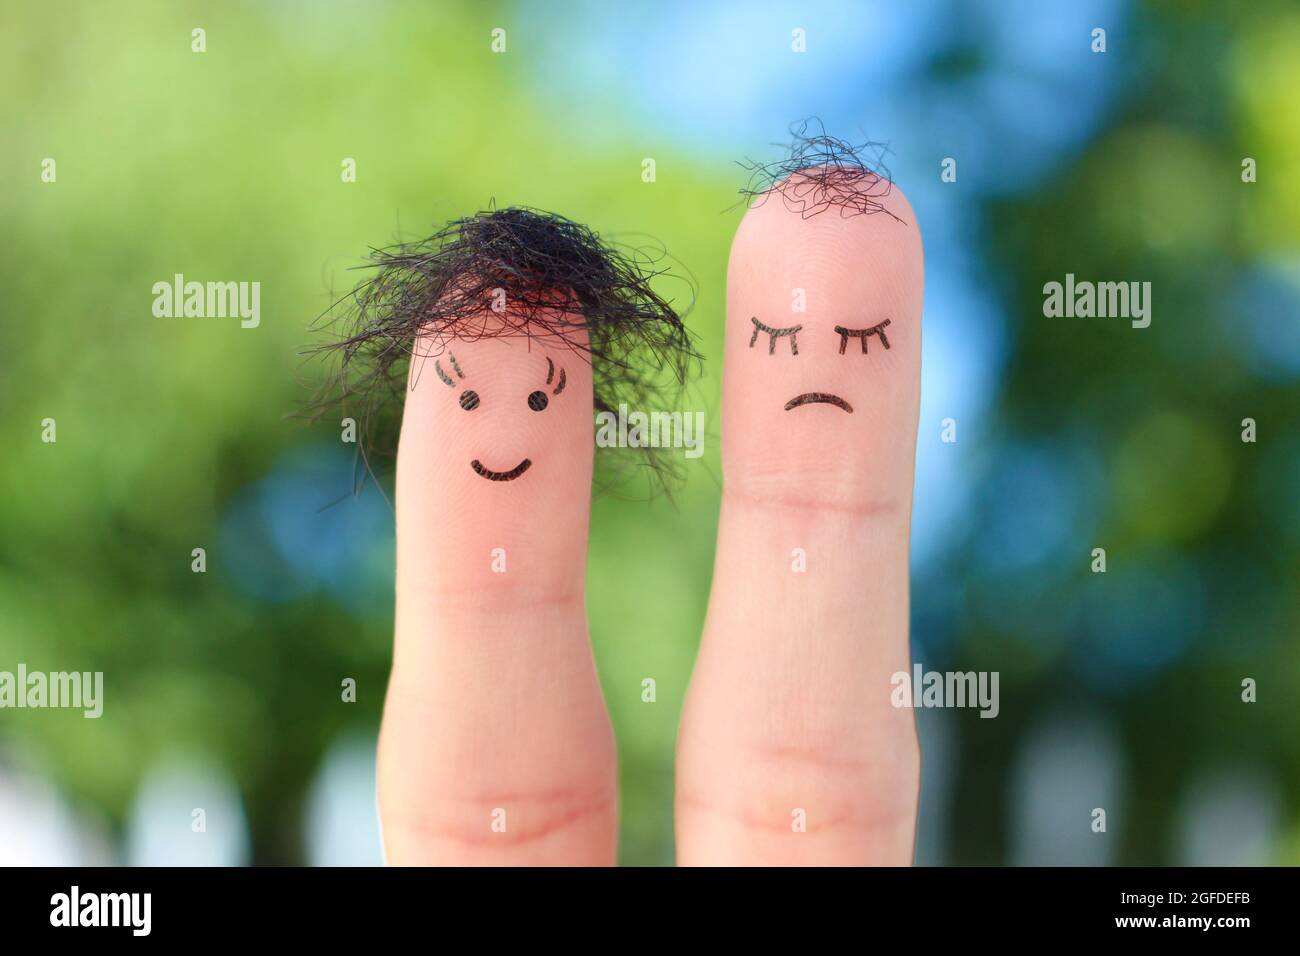 Fingers art of people. One woman is upset because she doesn't have much hair. Stock Photo